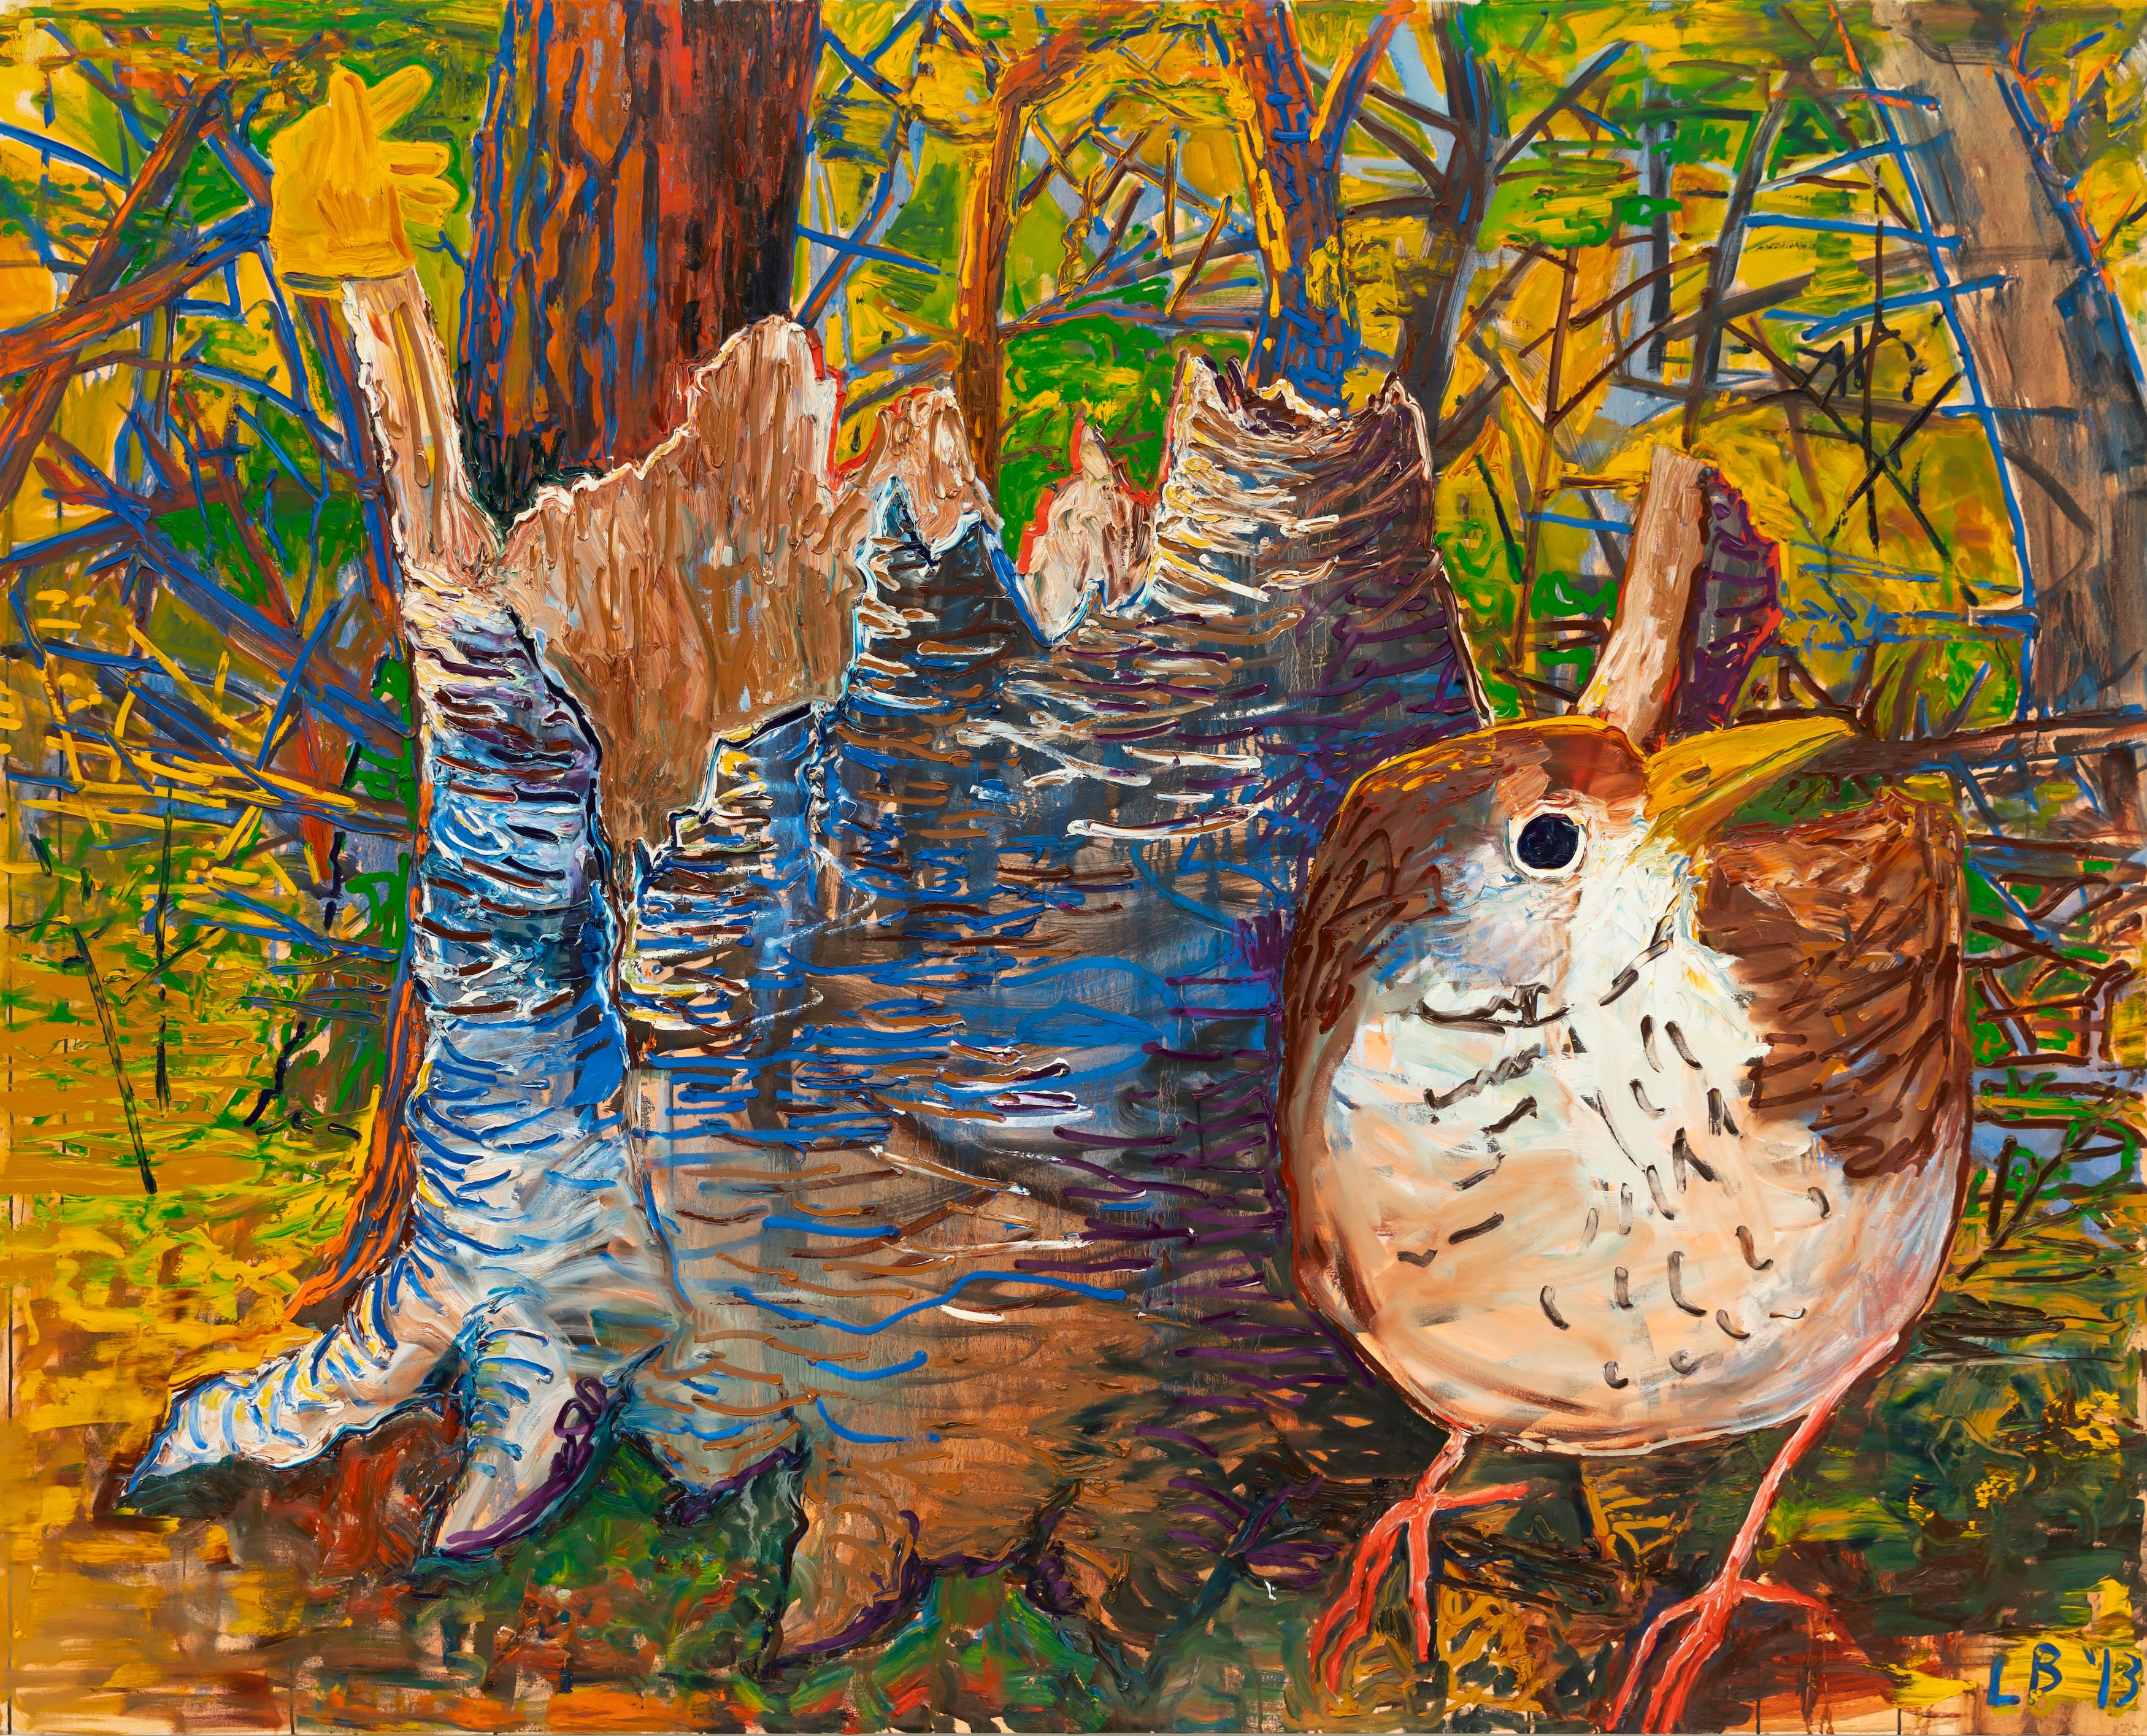 The Yellow Grove, Oil on Canvas, 2013